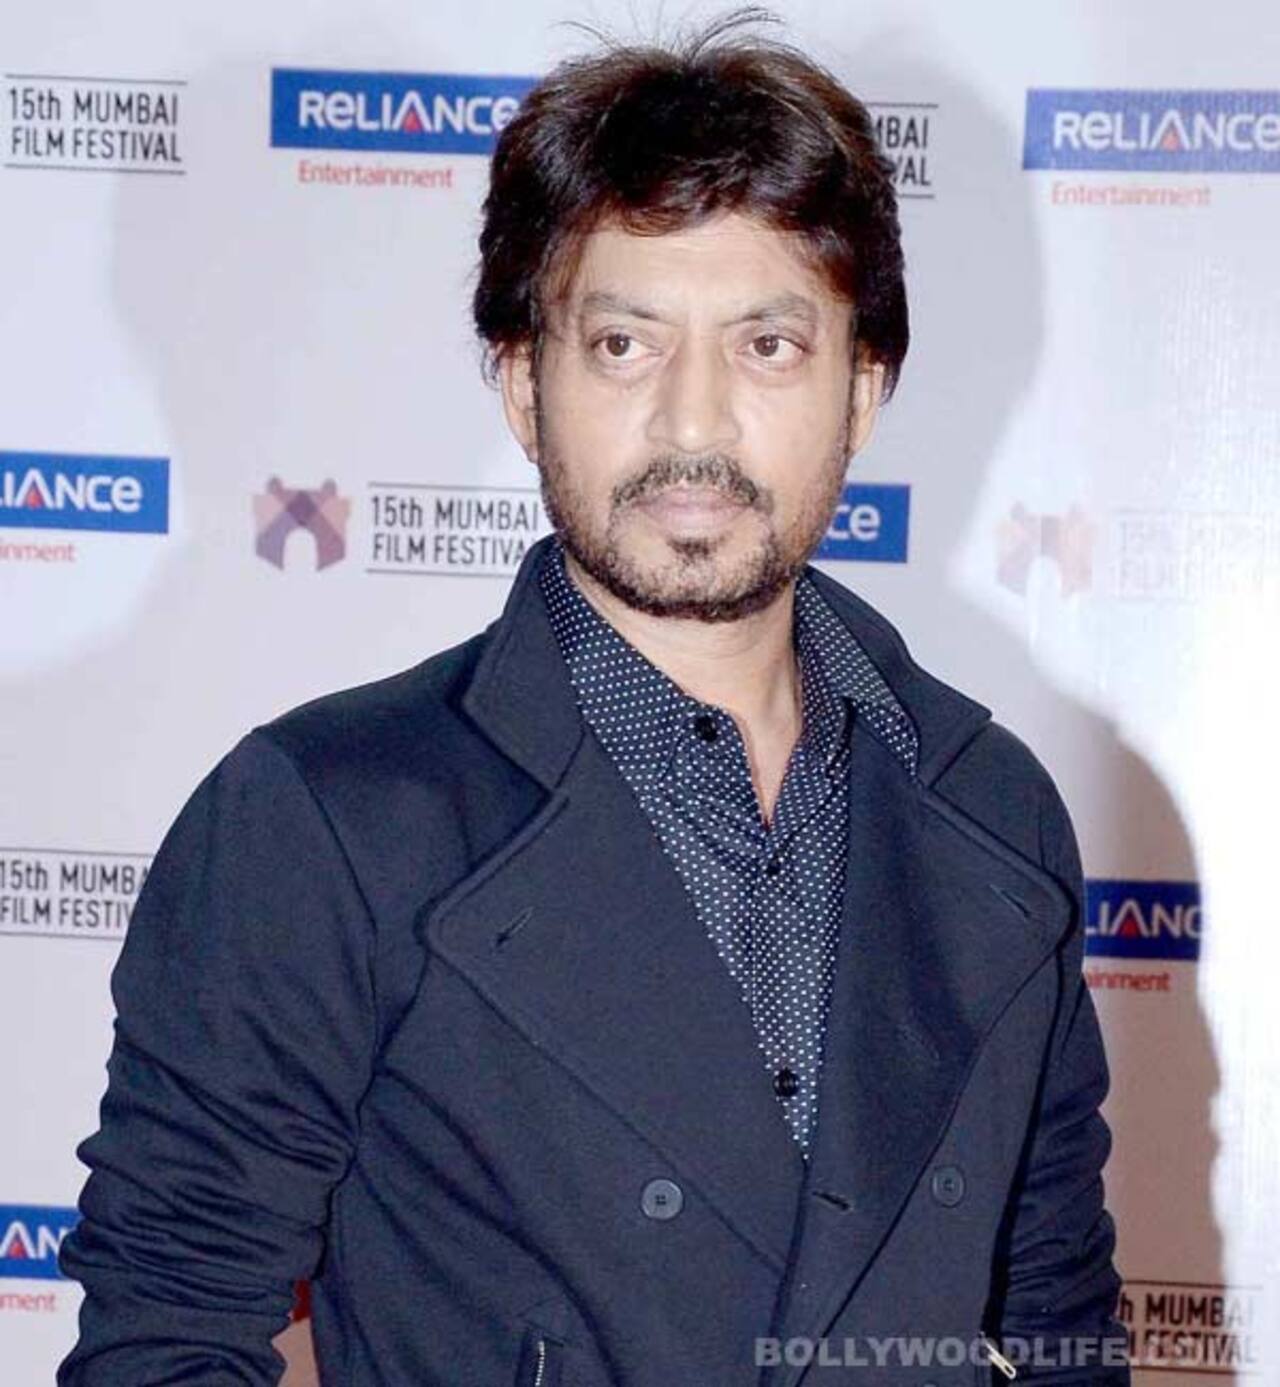 Irrfan Khan to have the best of both worlds with Jurassic World and Piku!